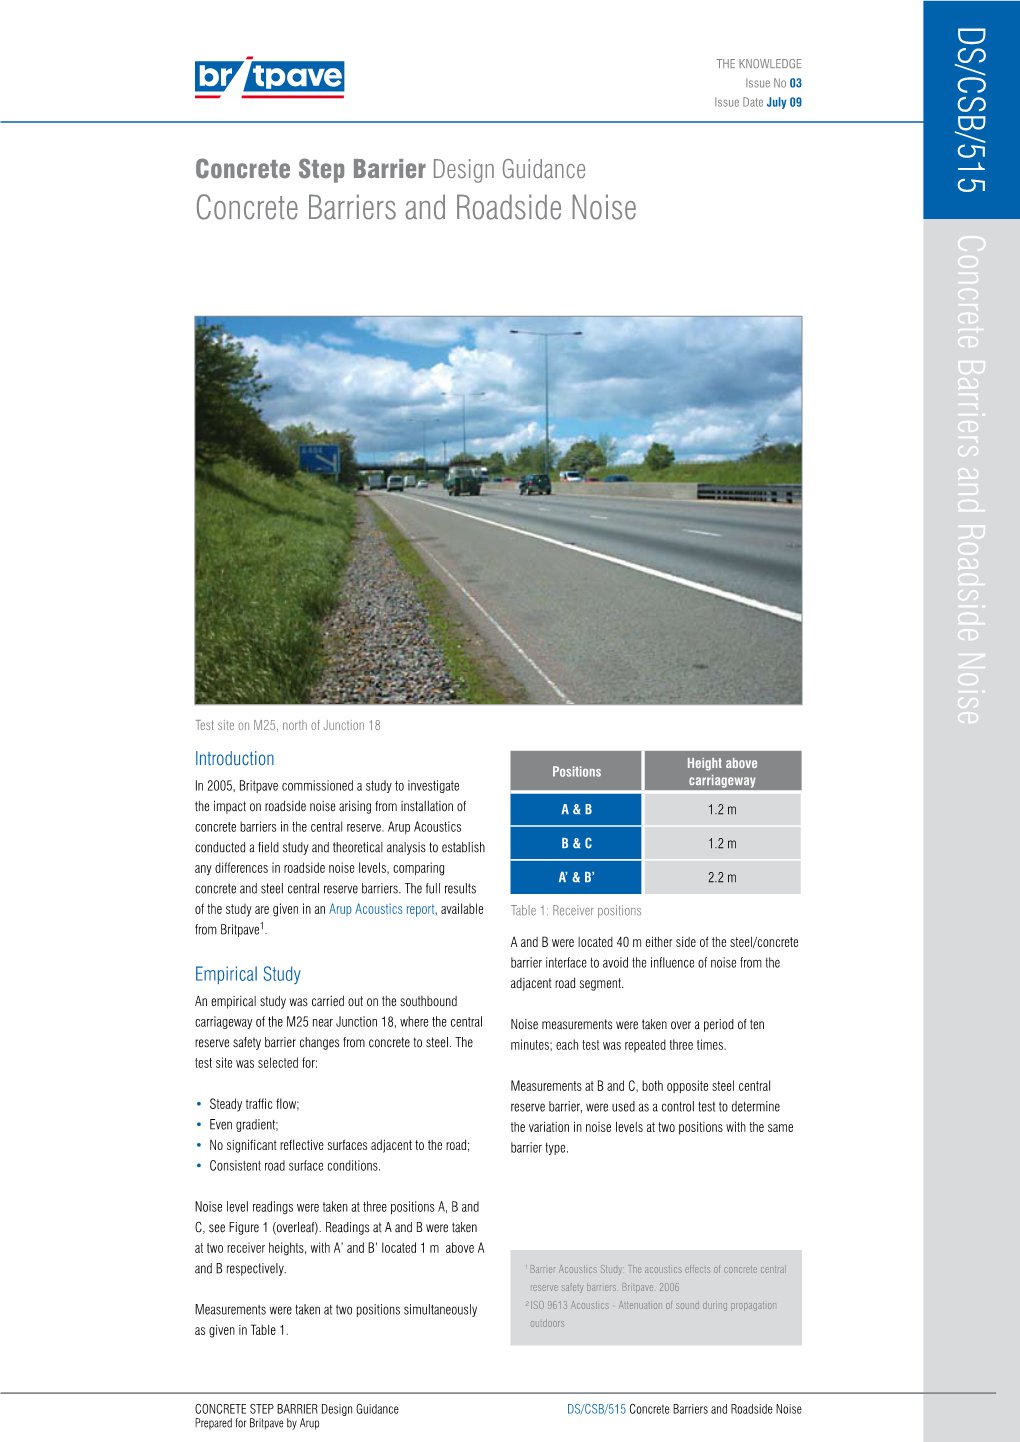 Concrete Barriers and Roadside Noise DS/CSB/515